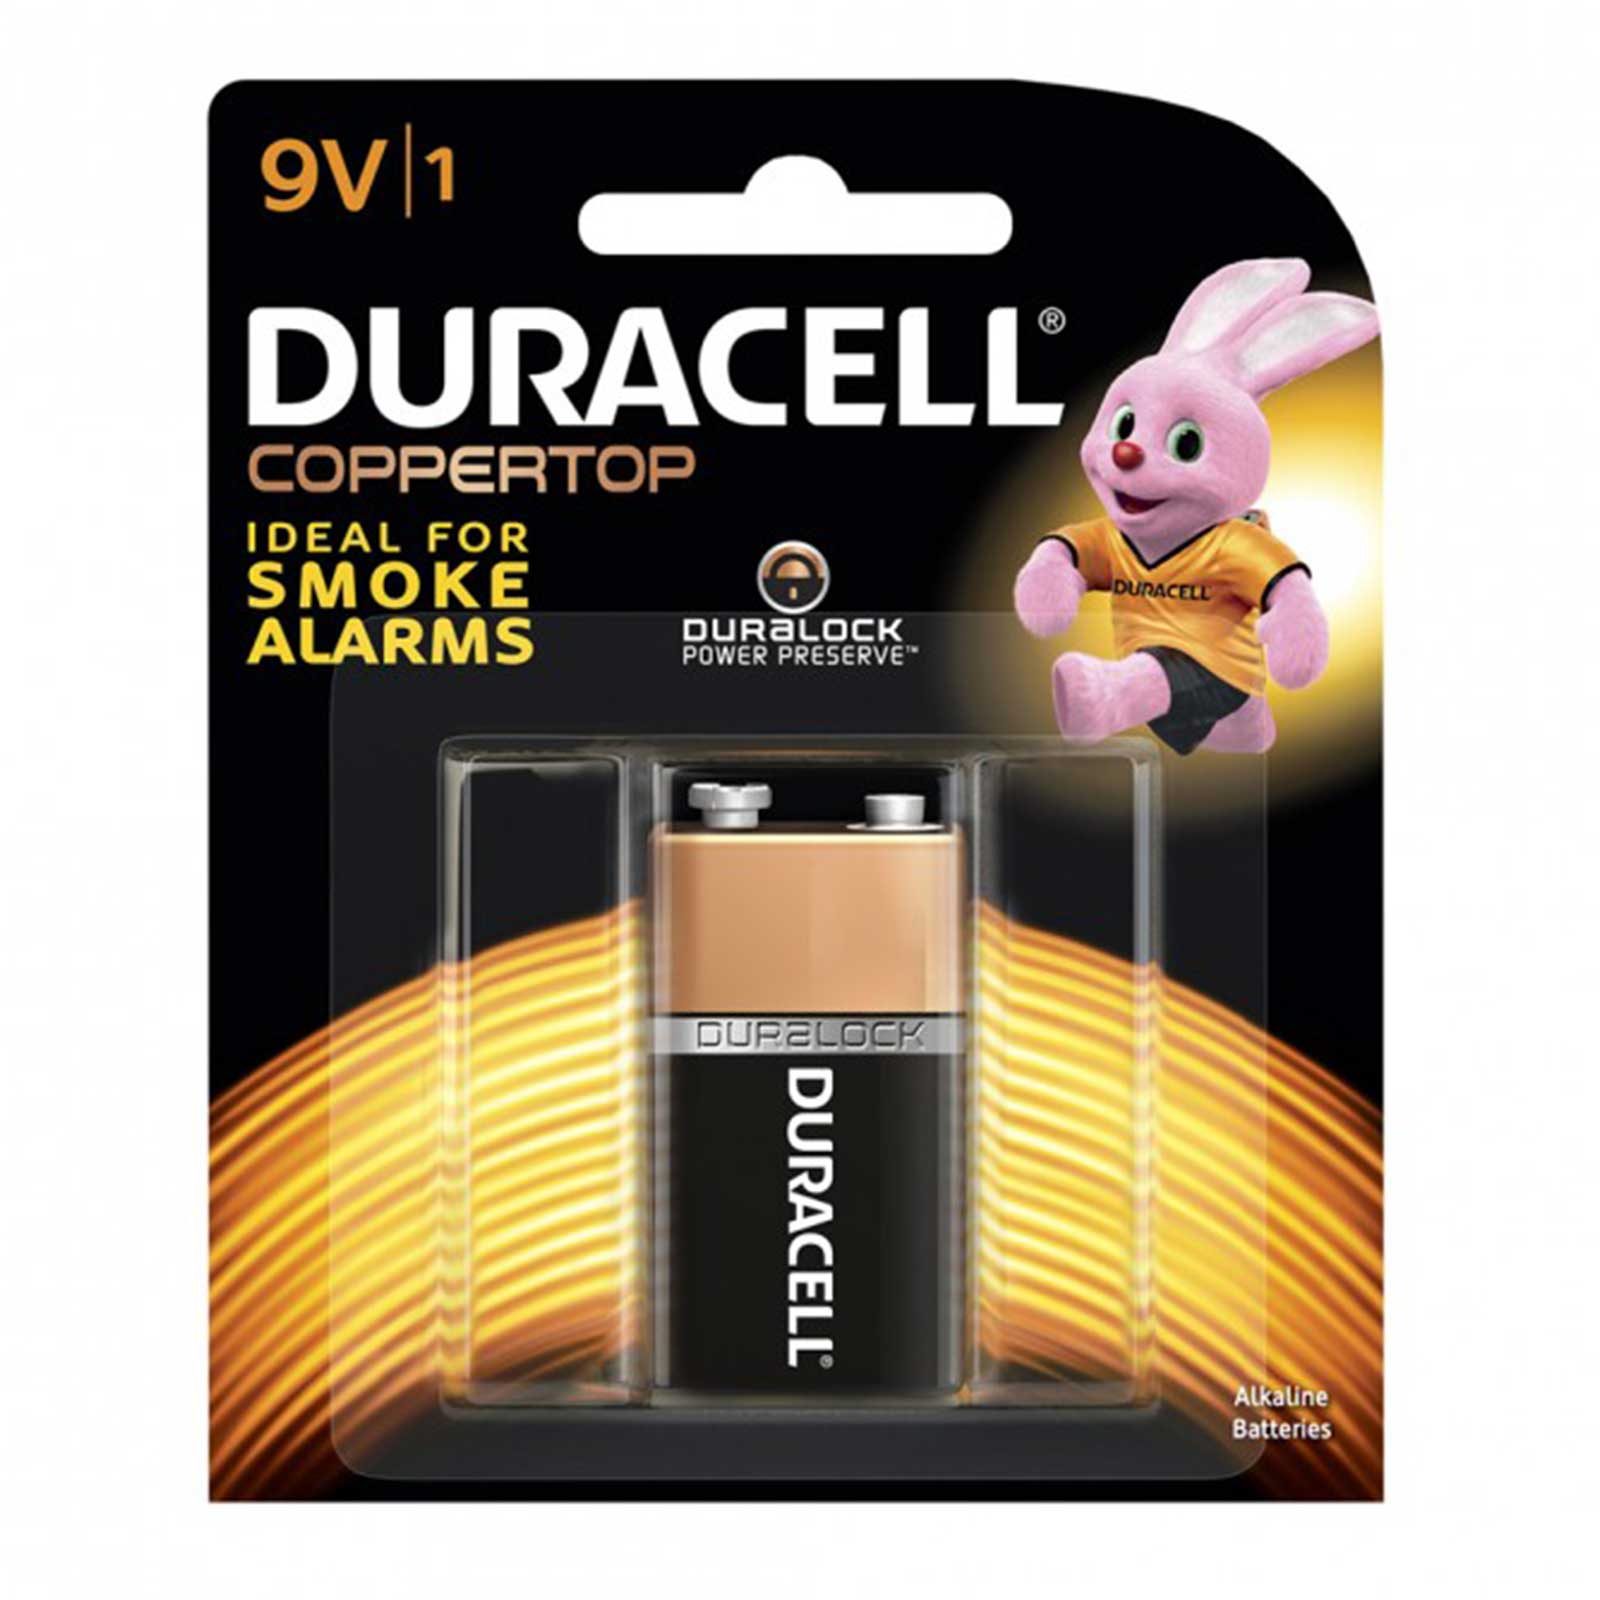 Duracell CopperTop 9v1 Batteries (pack of 12) - Volt Candy